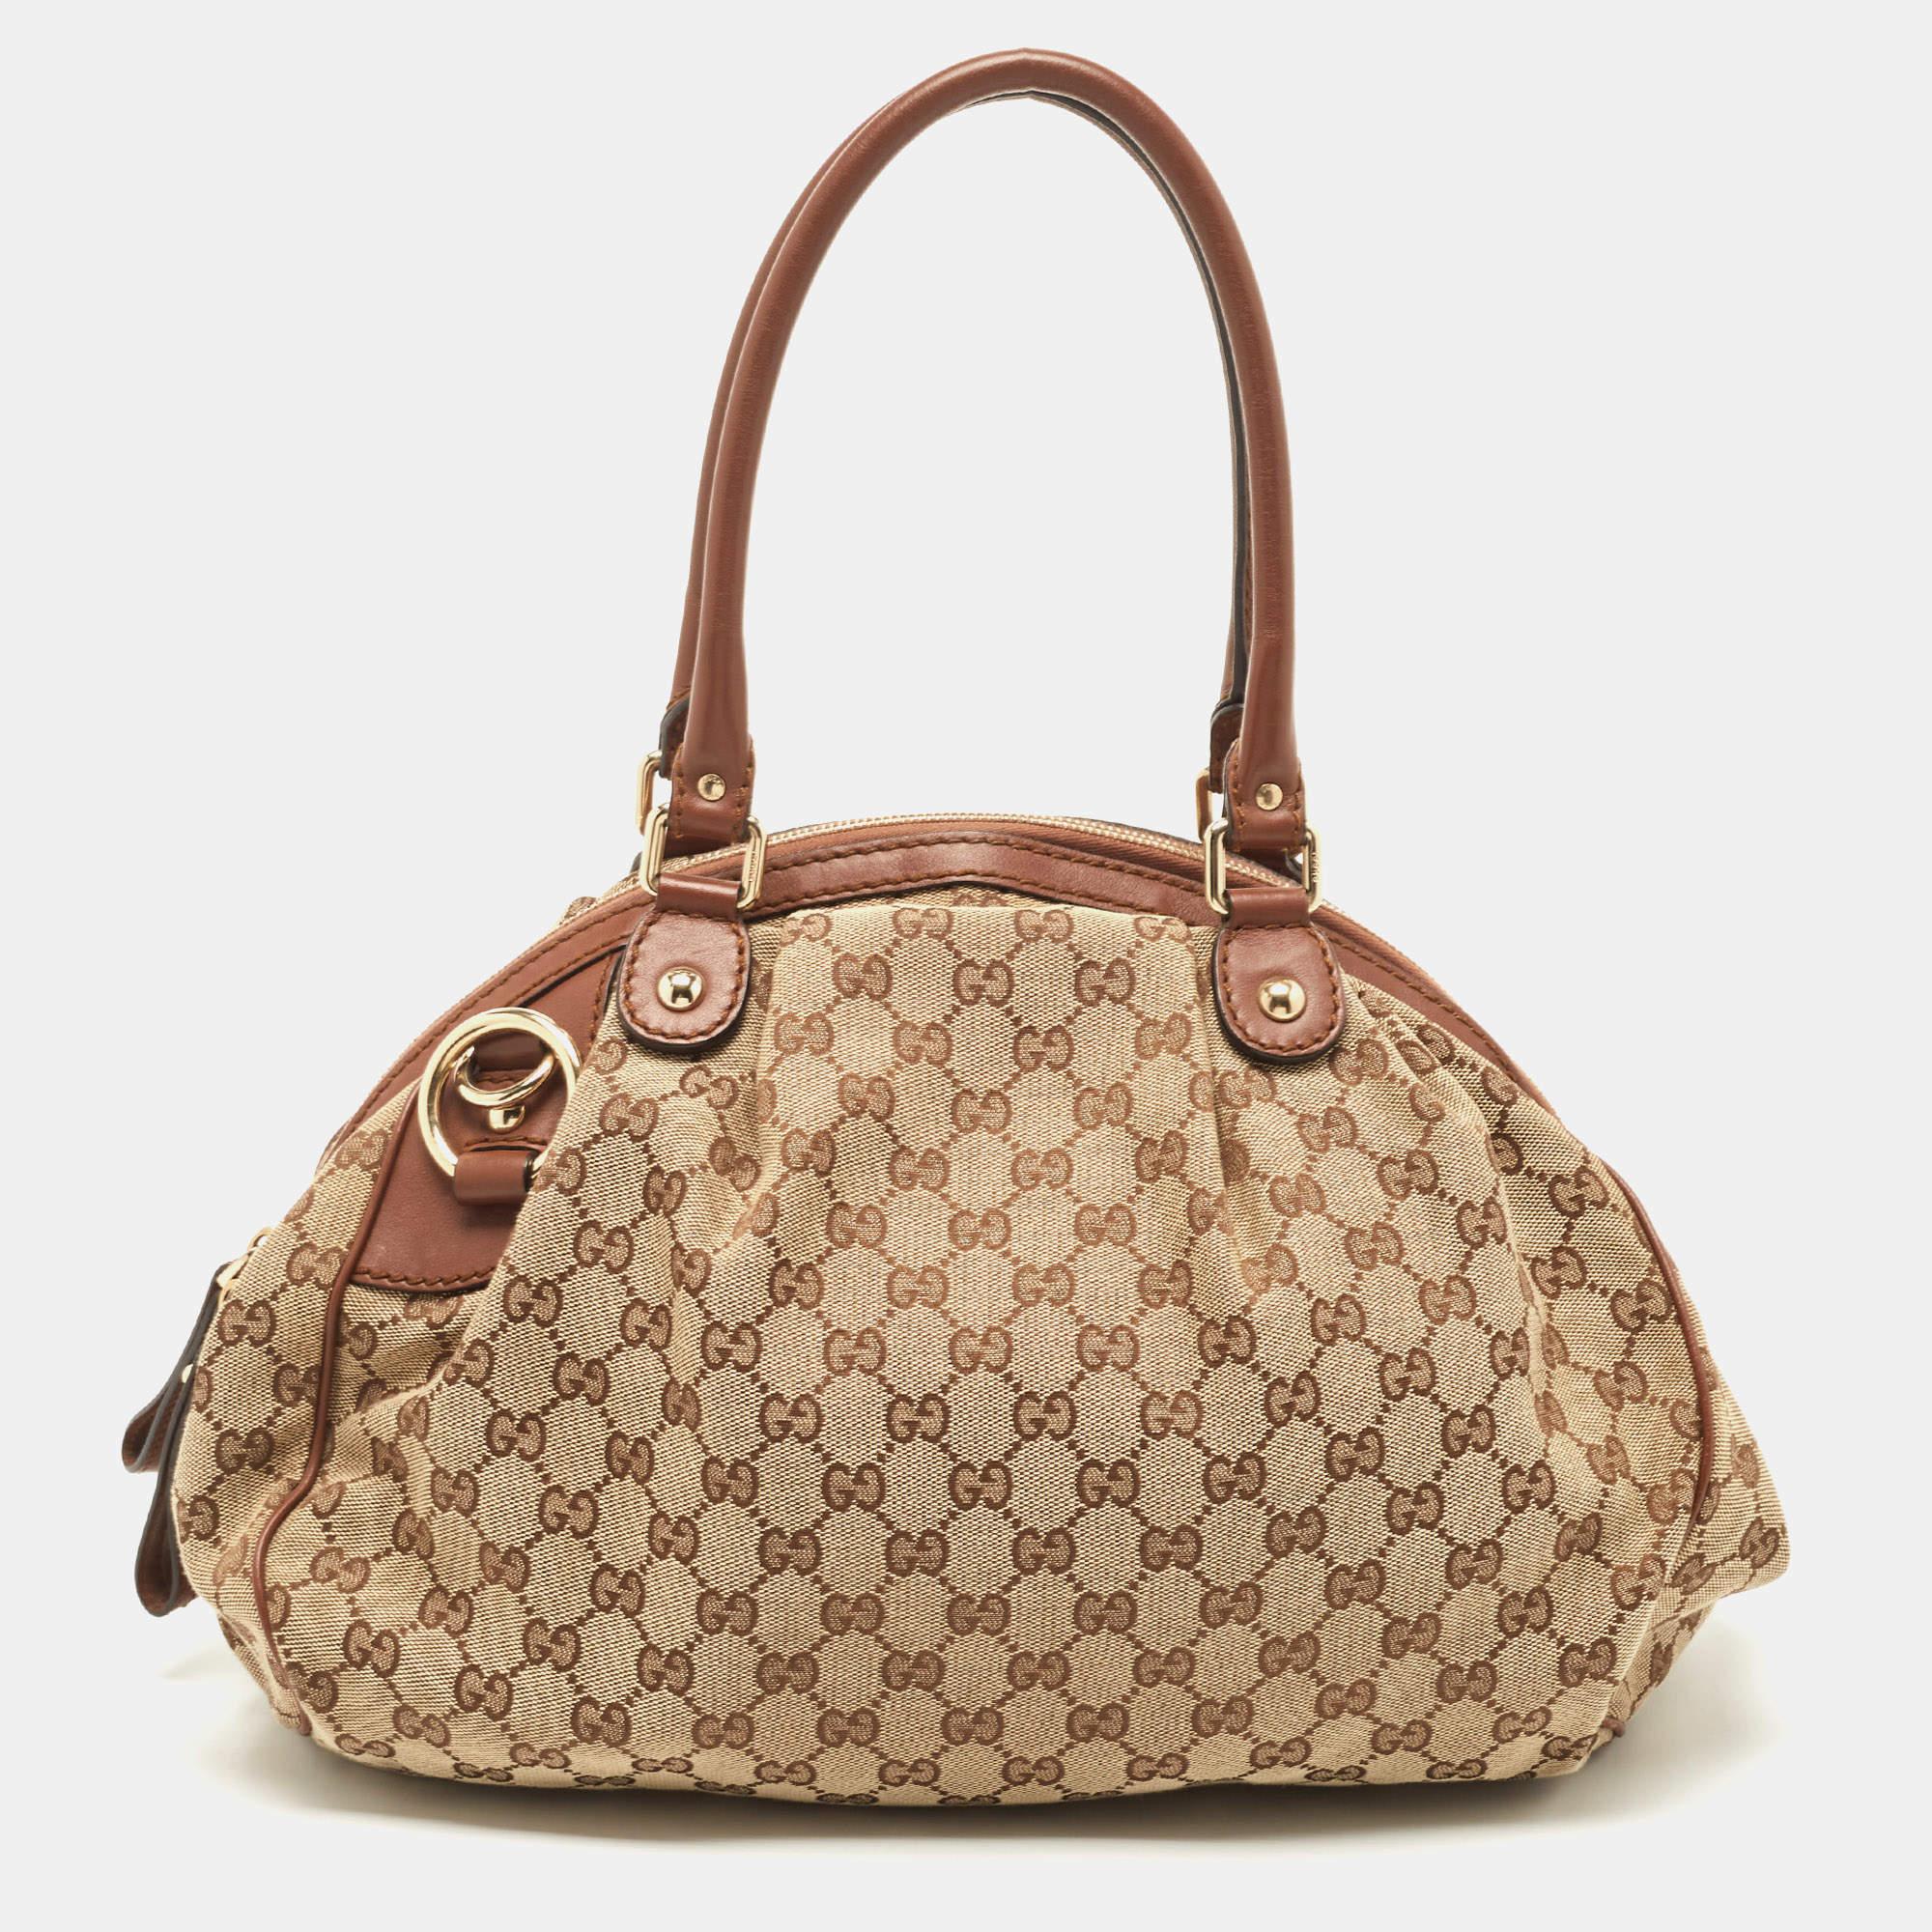 From the House of Gucci, the Sukey Boston bag is a classic. Made from signature GG canvas, the bag is styled with leather trims. It comes with a spacious fabric interior and two handles.

